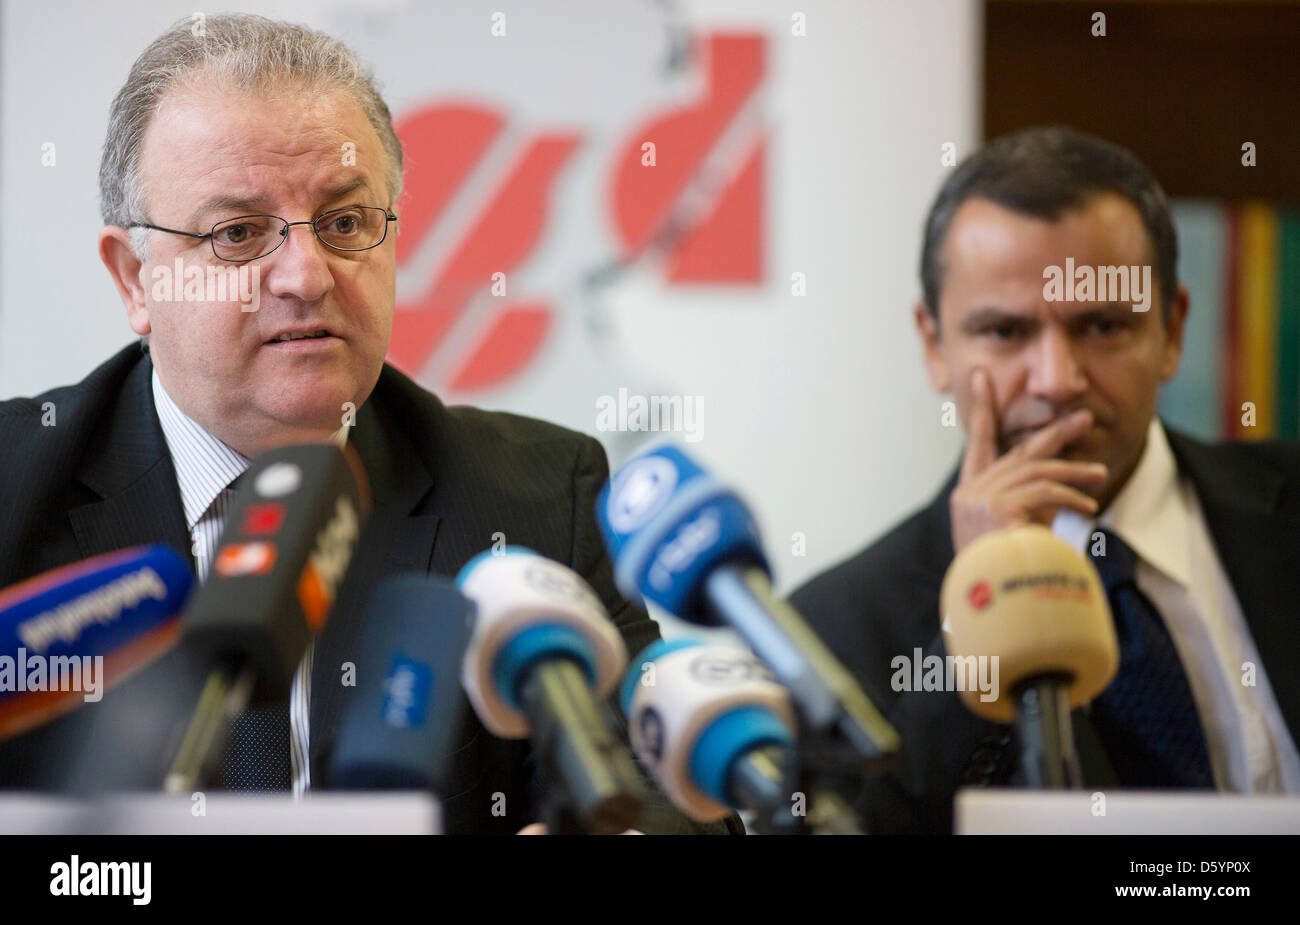 The Chairman of the Turkish Community in Germany Kenan Kolat (L) and the Chairman of the Bundestag investigation committee on the murders committed by the National Socialist Underground (NSU) terror cell, Sebastian Edathy, attend a press conference in Berlin, Germany, 01 November 2012. One year after the disclosure of tge NSU terror cell, politicians and migrant representatives hav Stock Photo